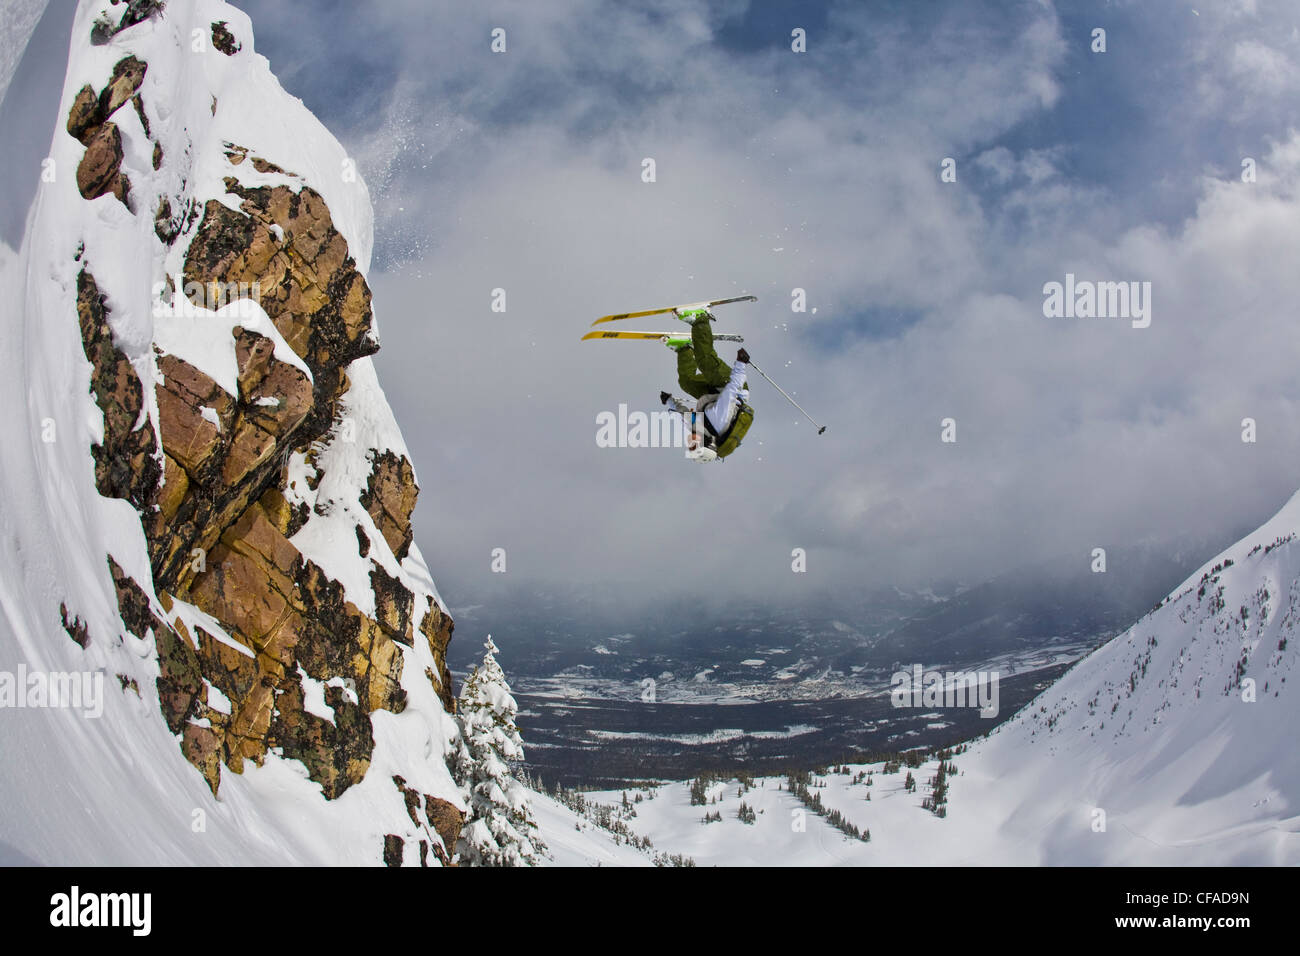 A male freeskier backflips in the Kicking Horse Backcountry, Golden, BC Stock Photo